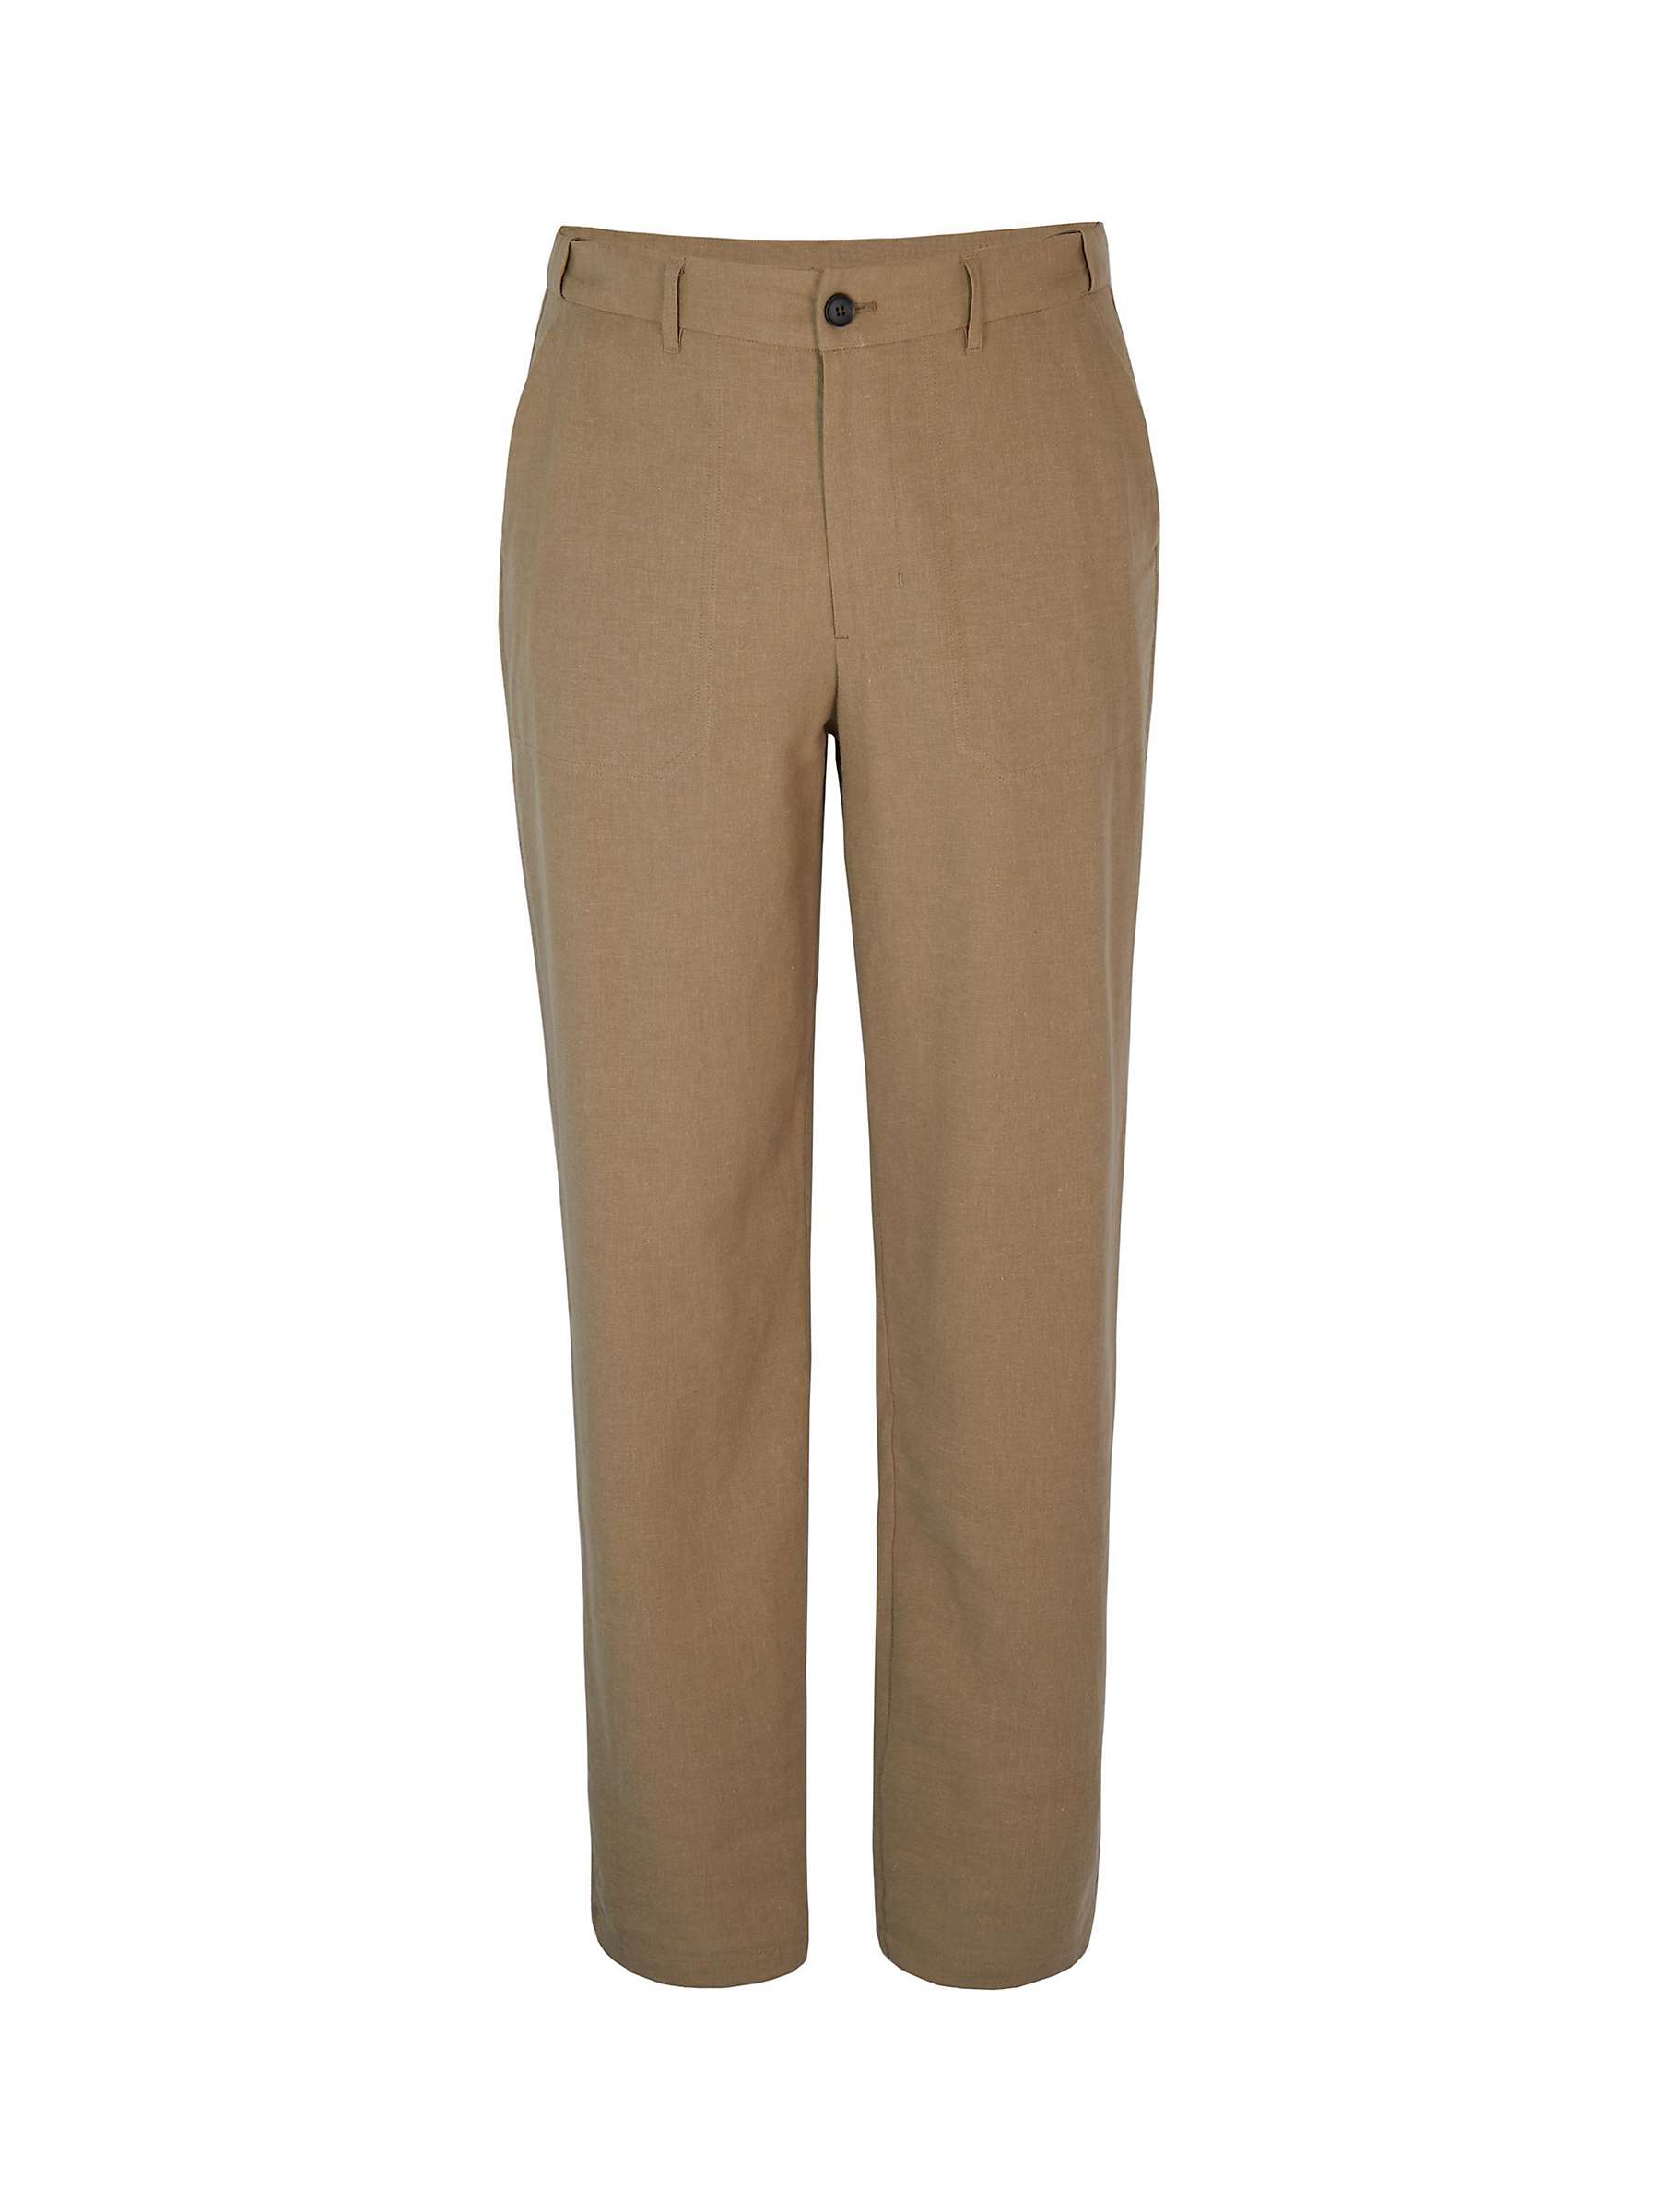 Buy Rohan Porto Linen Blend Trousers, Stone Online at johnlewis.com